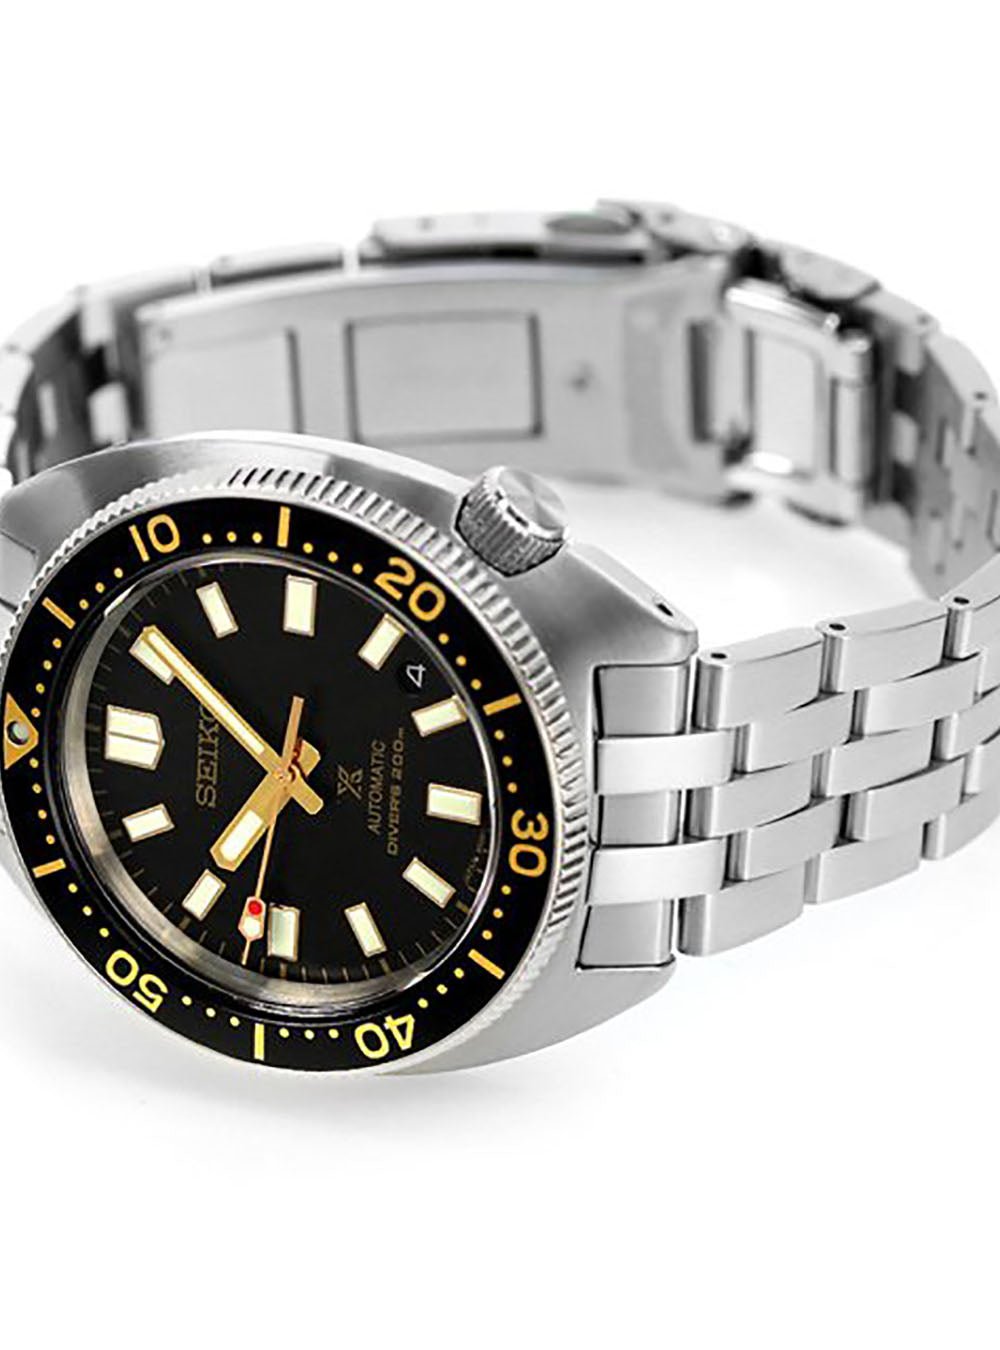 SEIKO PROSPEX 200M DIVER AUTOMATIC SBDC173 MADE IN JAPAN JDM – japan-select